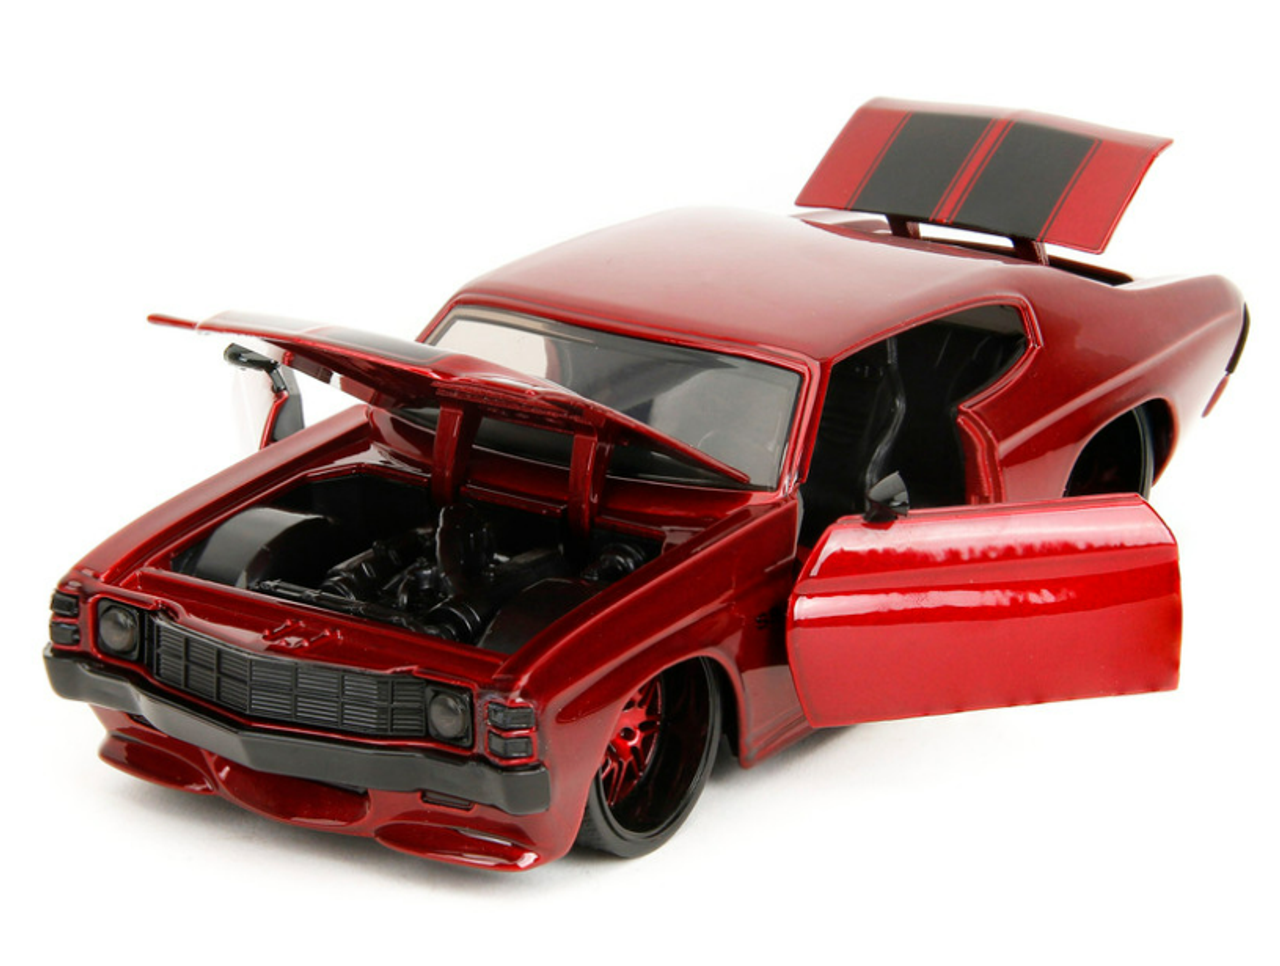 1971 Chevrolet Chevelle SS Red Metallic with Black Stripes "Pink Slips" Series 1/24 Diecast Model Car by Jada